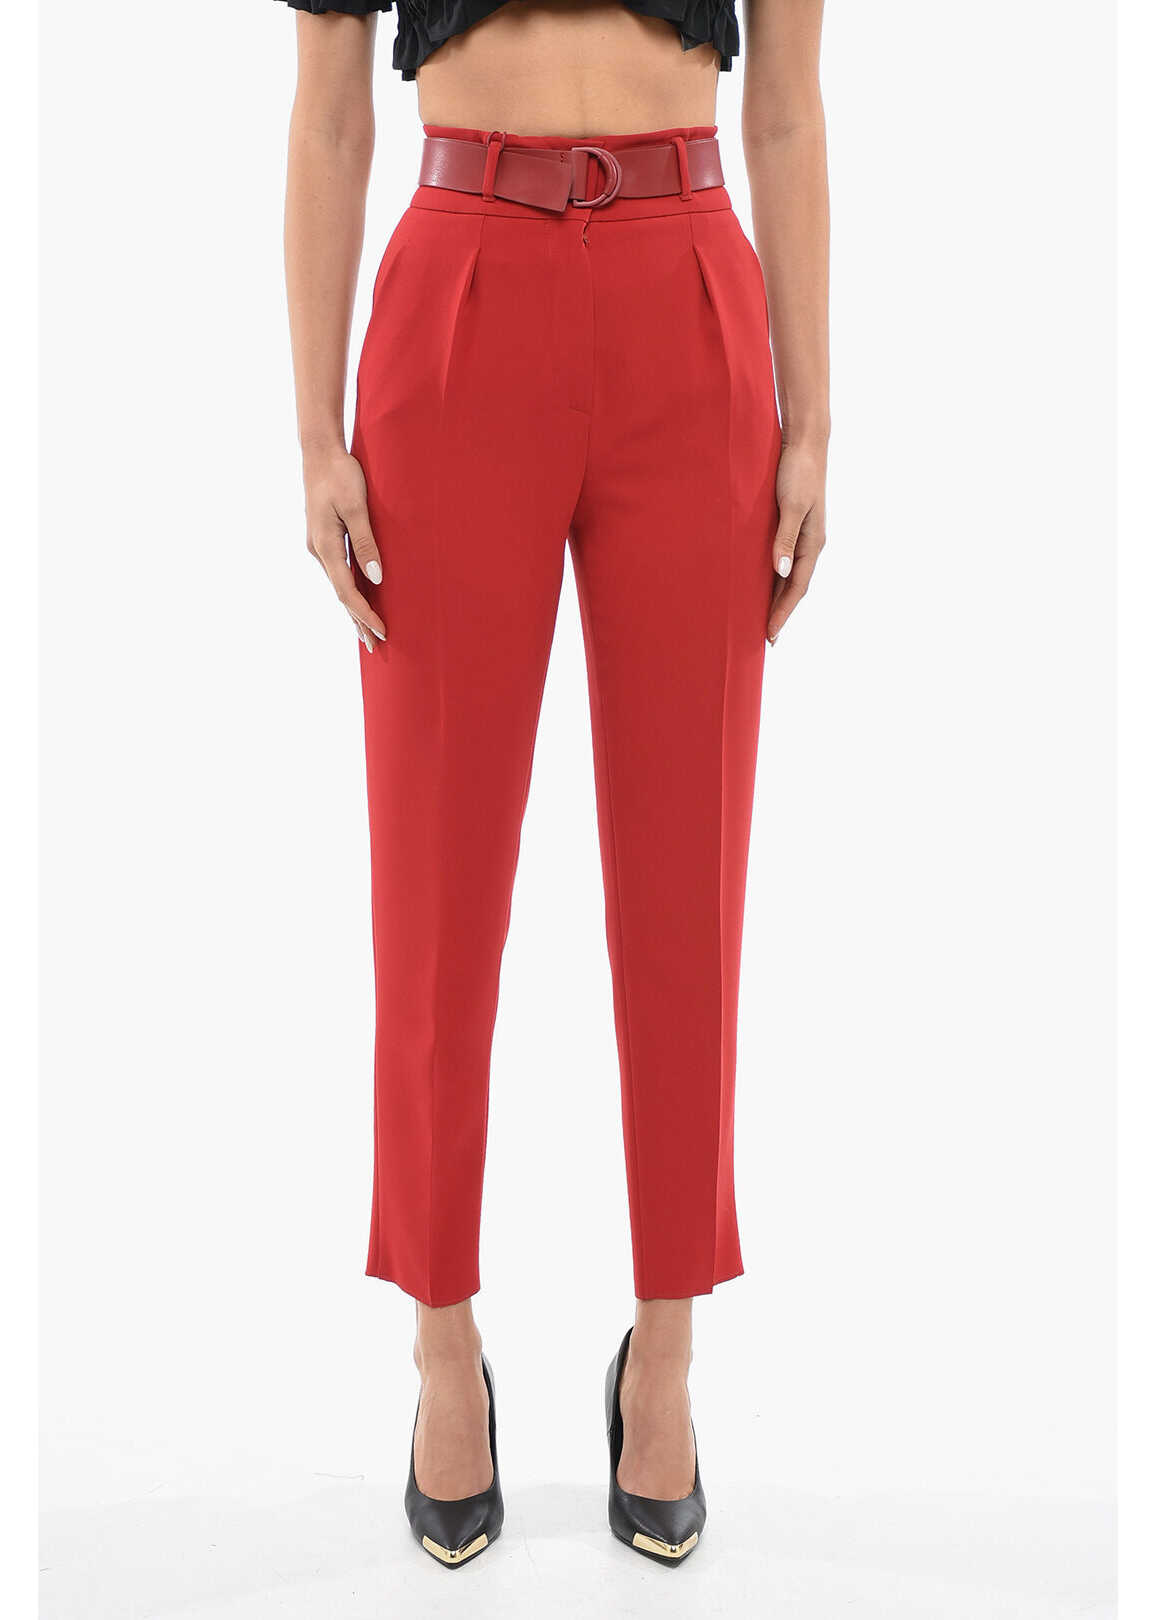 Max Mara Studio Single-Pleated Ariel Pants With Eco-Leather Belt Red